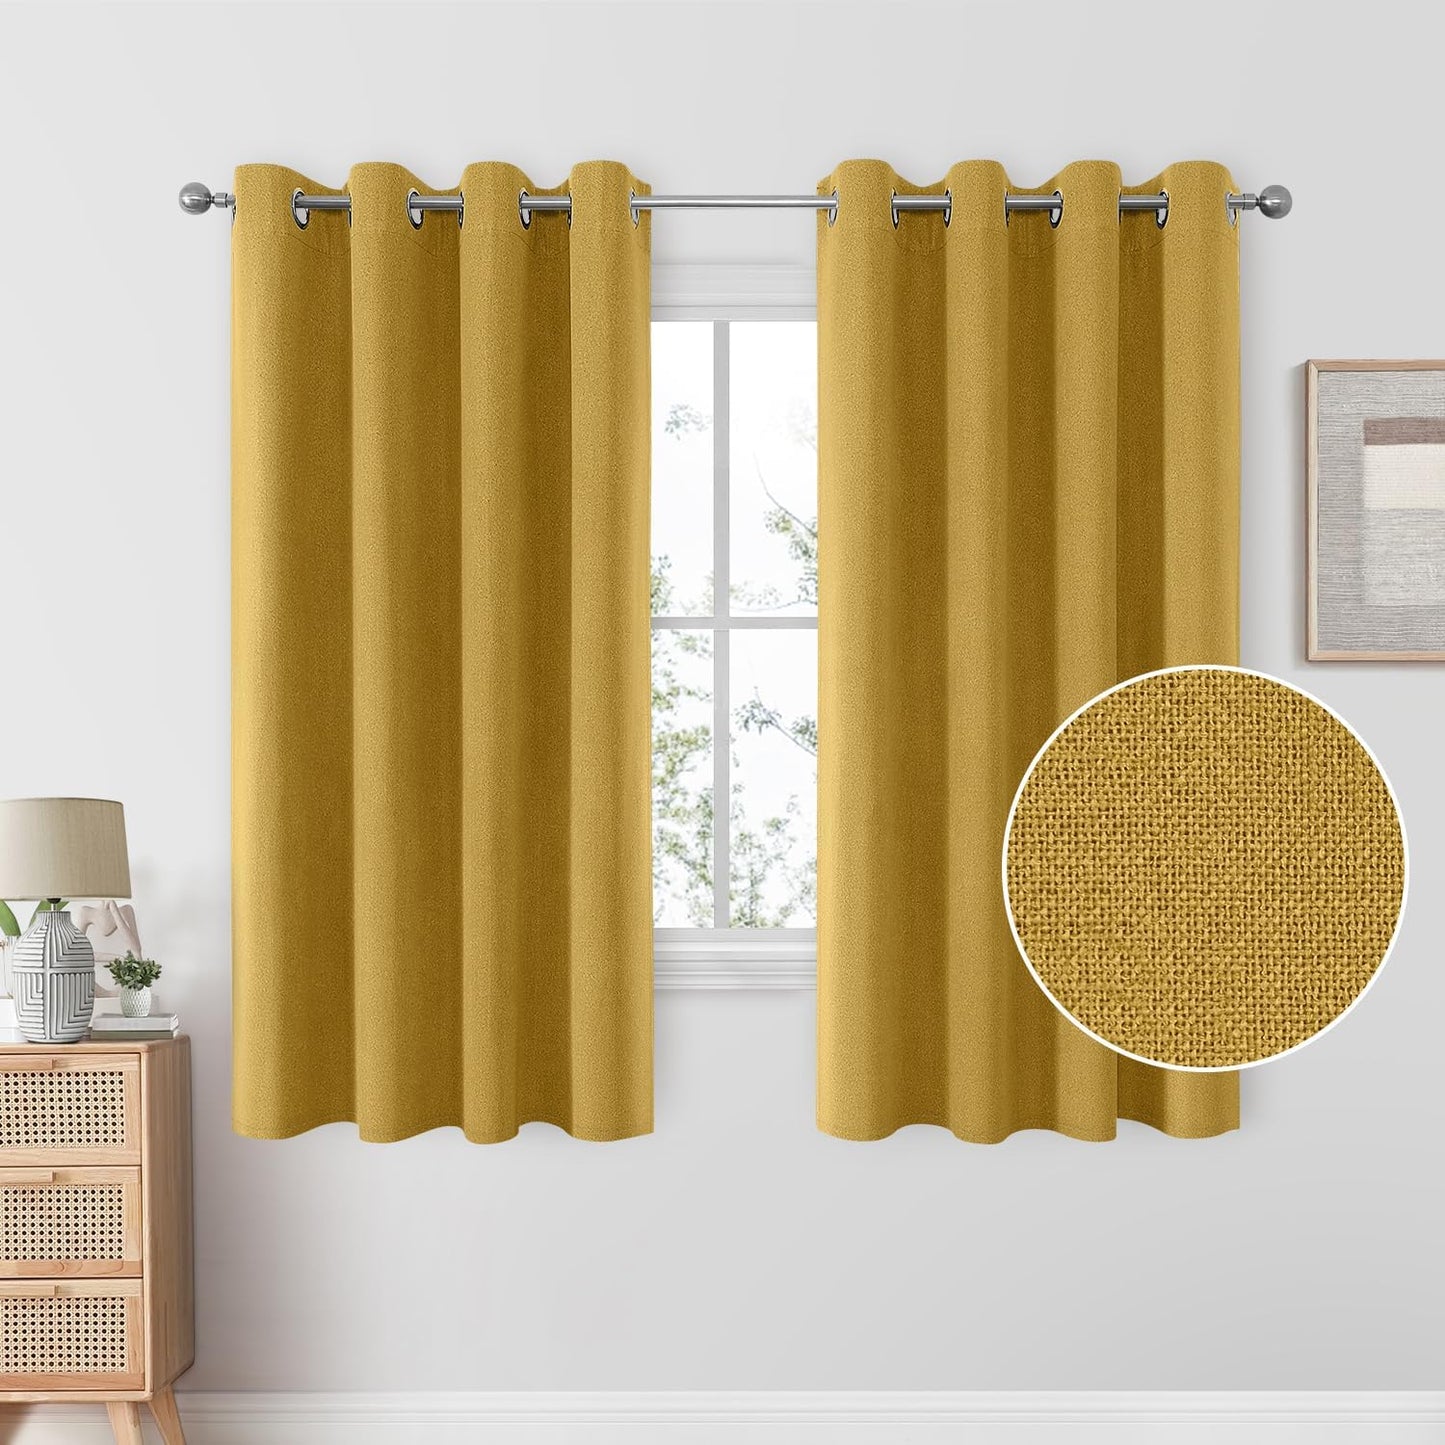 HOMEIDEAS 100% Blush Pink Linen Blackout Curtains for Bedroom, 52 X 84 Inch Room Darkening Curtains for Living, Faux Linen Thermal Insulated Full Black Out Grommet Window Curtains/Drapes  HOMEIDEAS Mustard Yellow W52" X L63" 